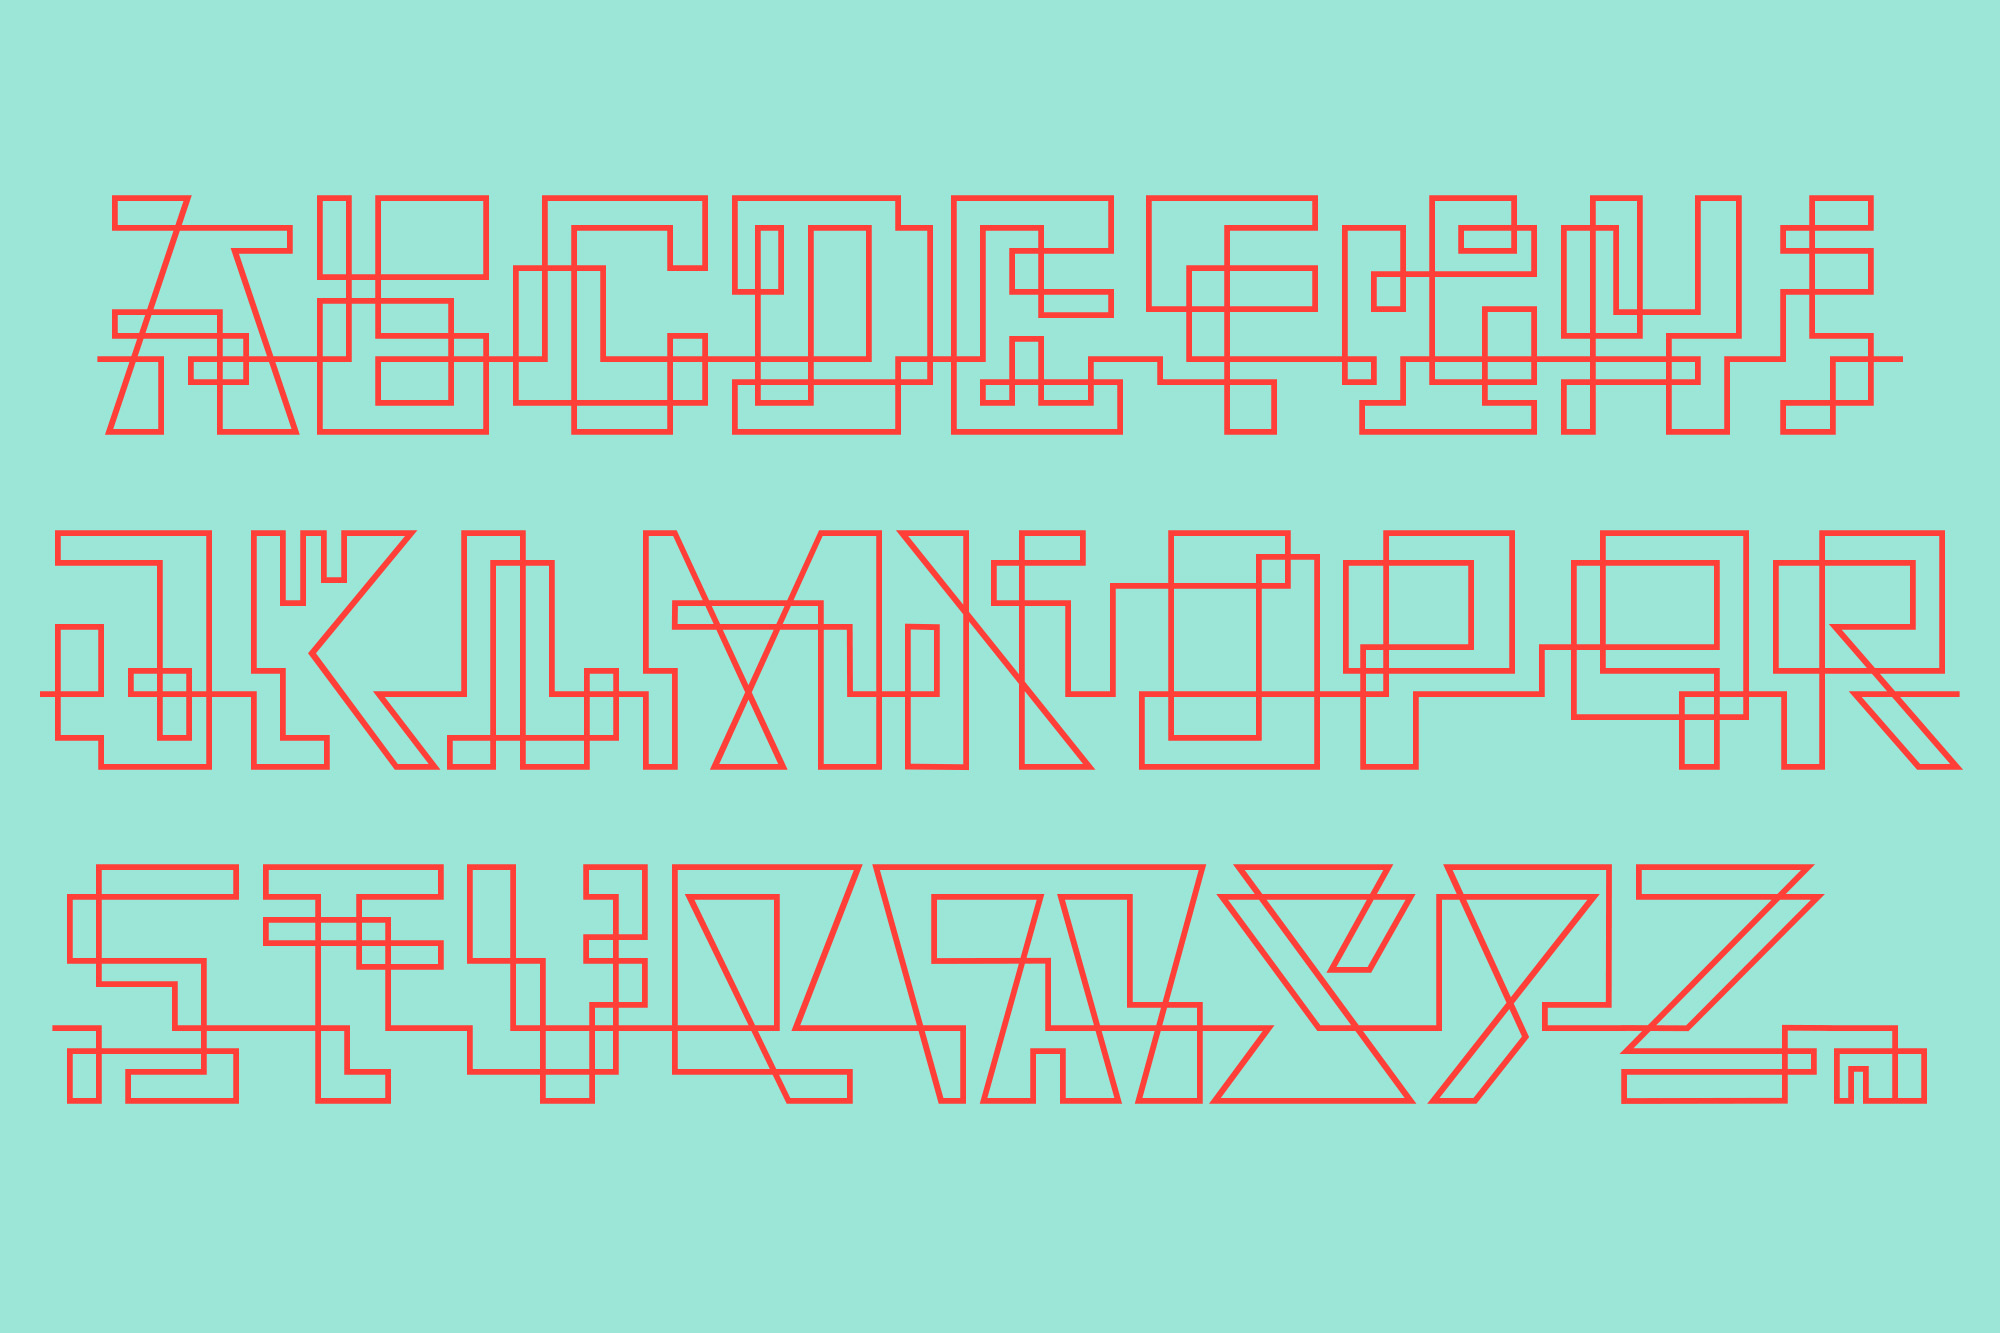 This project studies how glyphs are constructed and how their ductus can be modified.
                            I explored how far I can move the limits if I don’t worry about the legibility. In Weg, letters are built by a single line that connects them, along with words and paragraphs. When weight decreases, the legibility of the signs increases. This is the first stage. It’s a project in expansion. The set contains uppercase, lining figures and basic punctuation in three weights: Regular, Light and Thin. The current supported languages are Spanish, Guaraní and English. If you need any other language, please let me know. I would like to expand the character set.